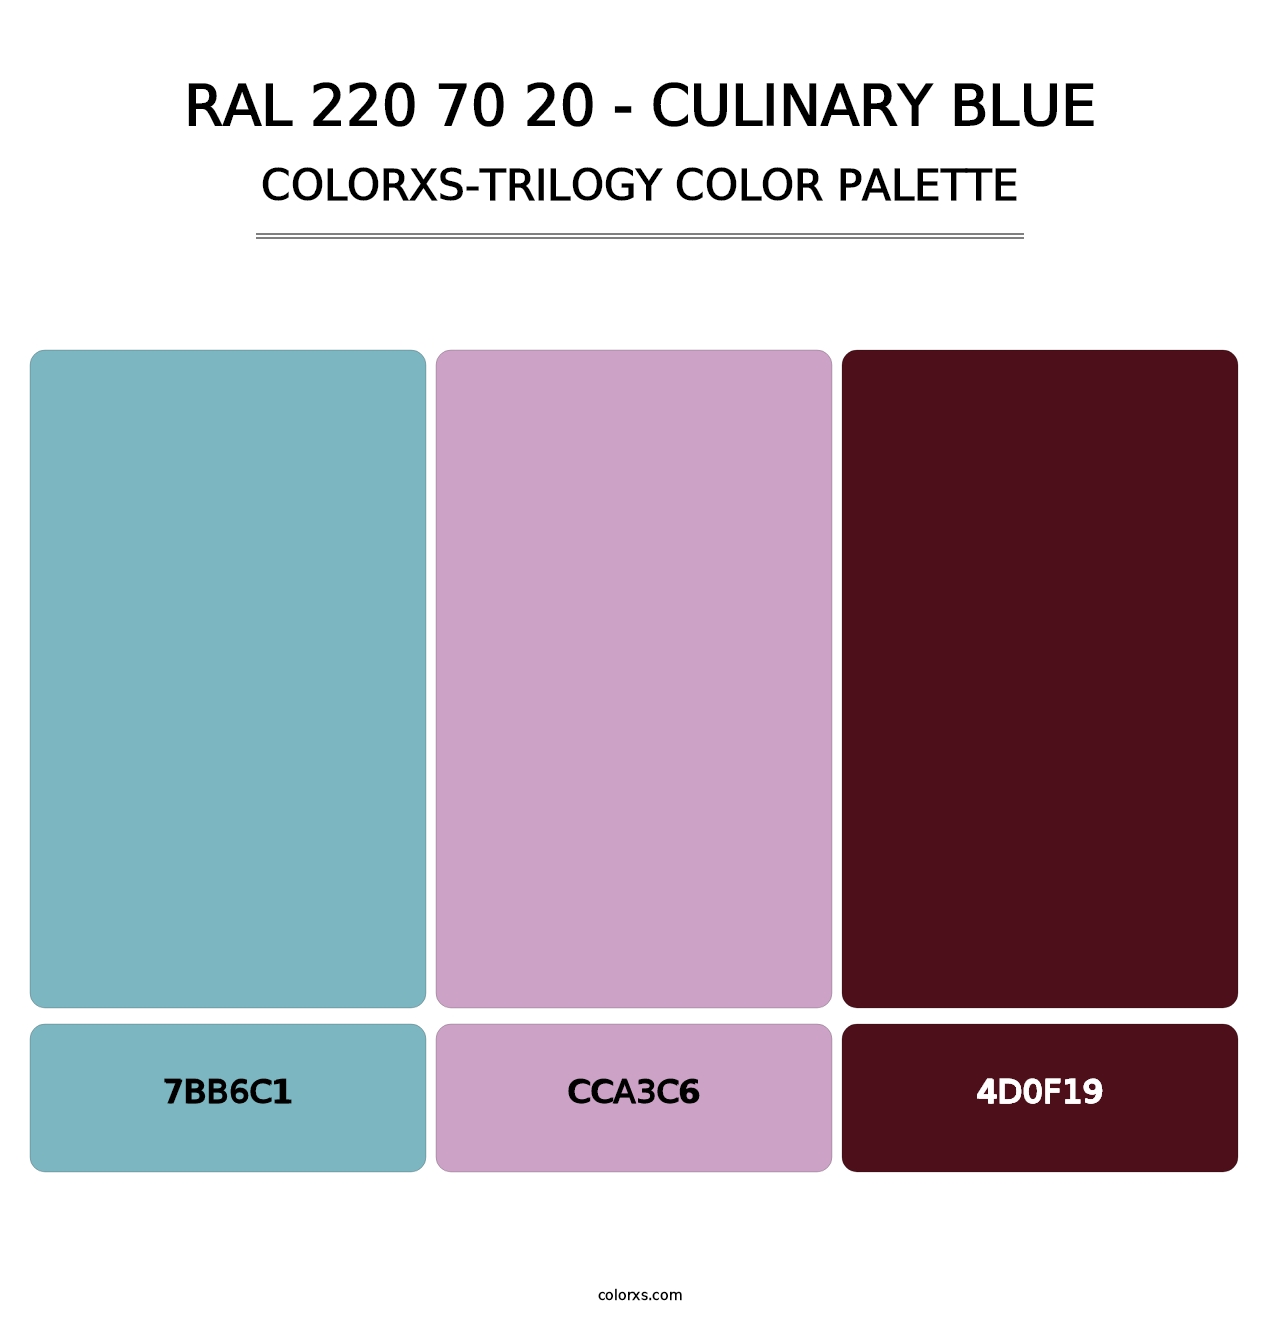 RAL 220 70 20 - Culinary Blue - Colorxs Trilogy Palette